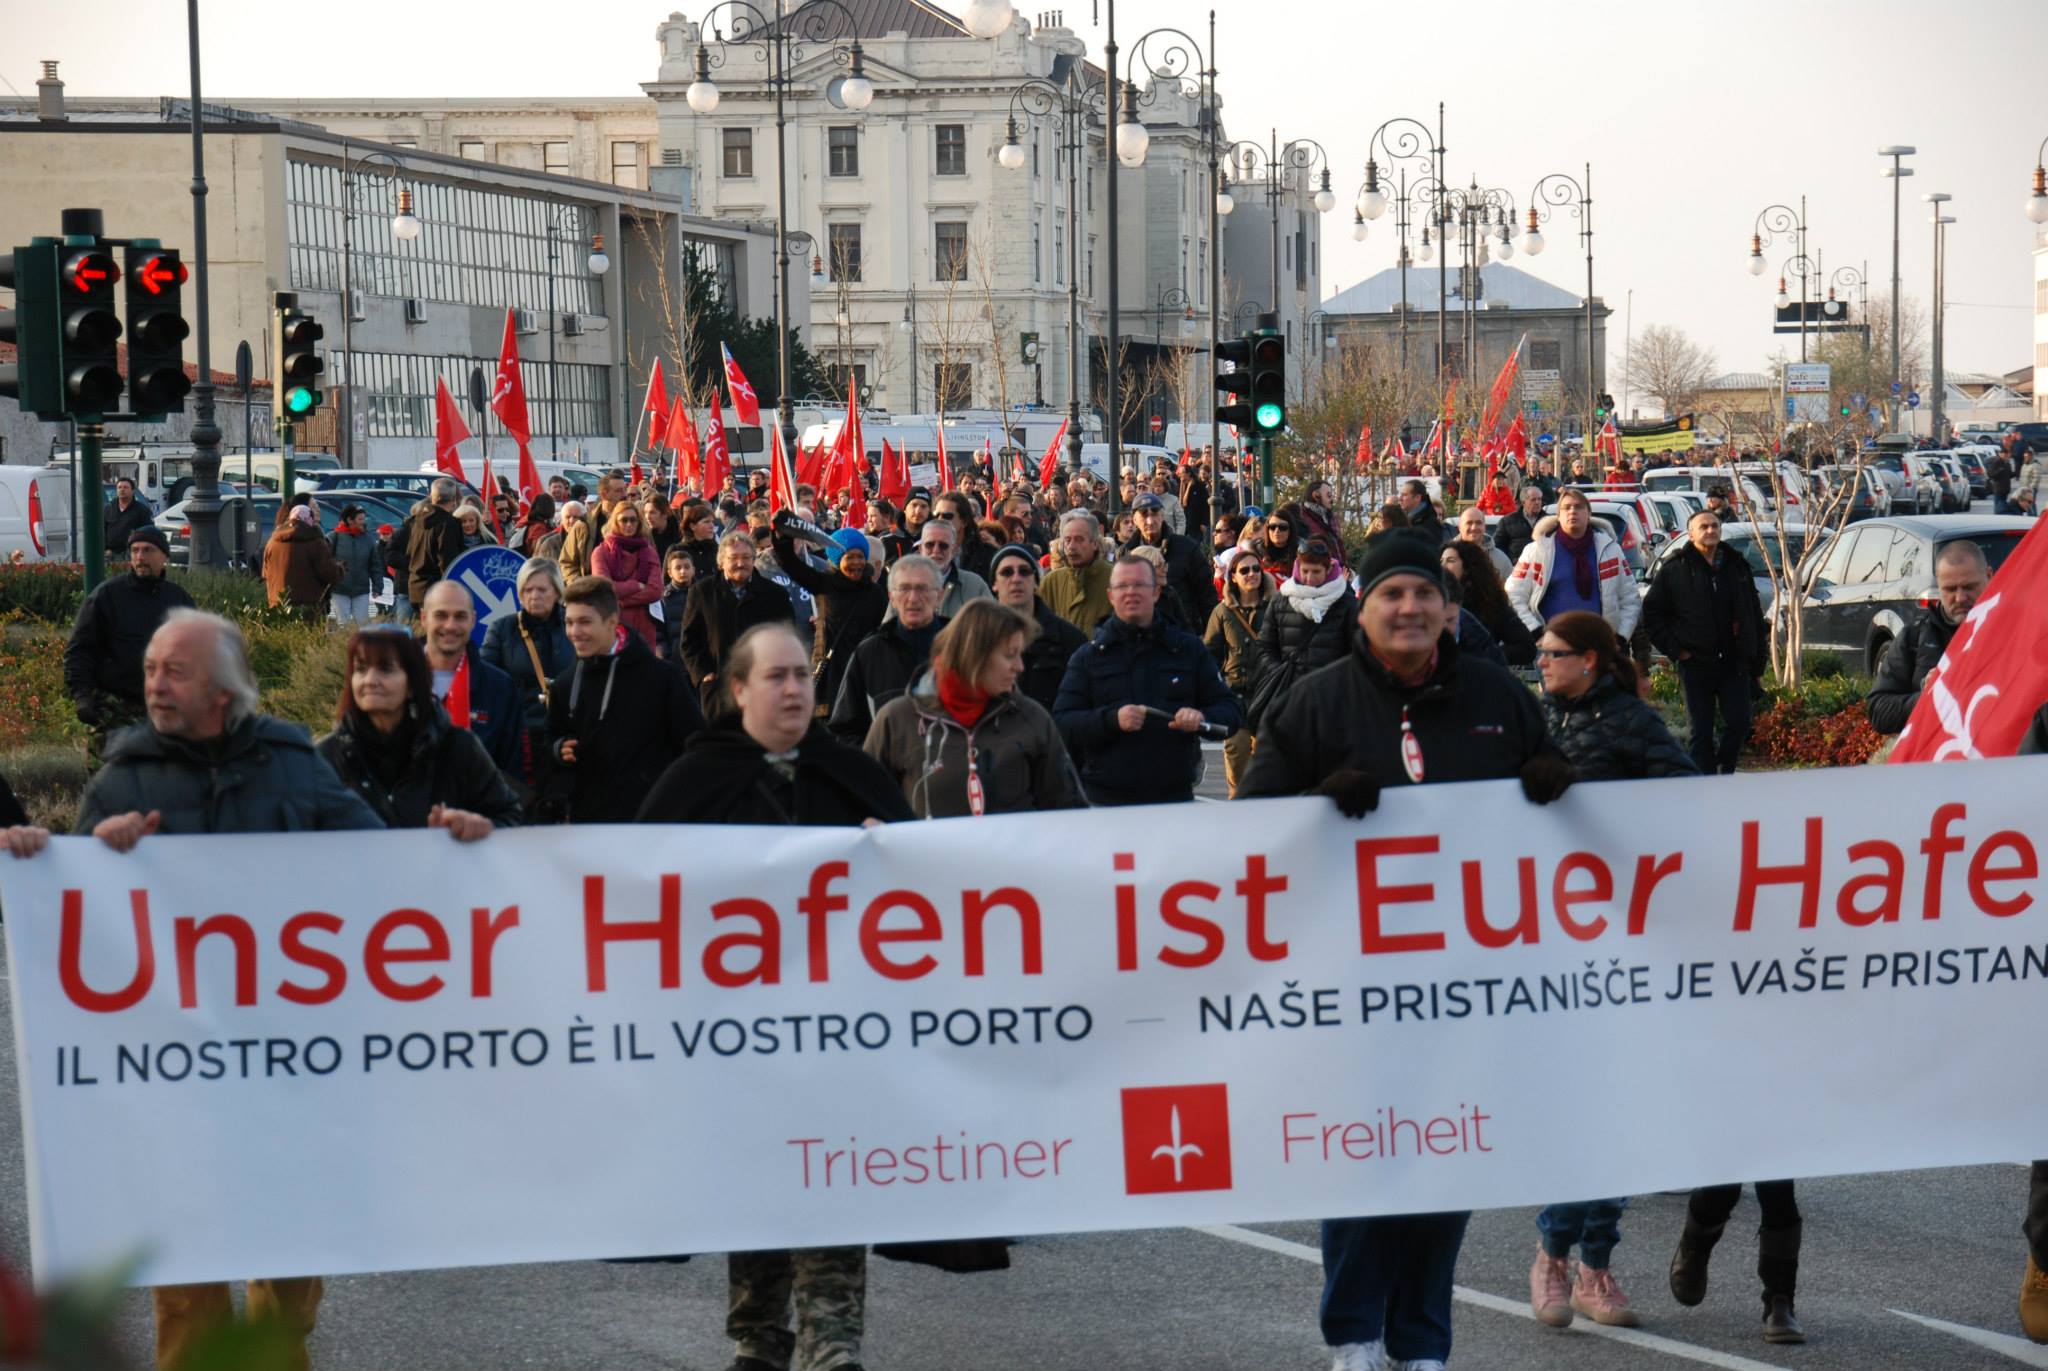 TRIESTE: PUSHING BACK THE ITALIAN ADMINISTRATION’S ABUSES